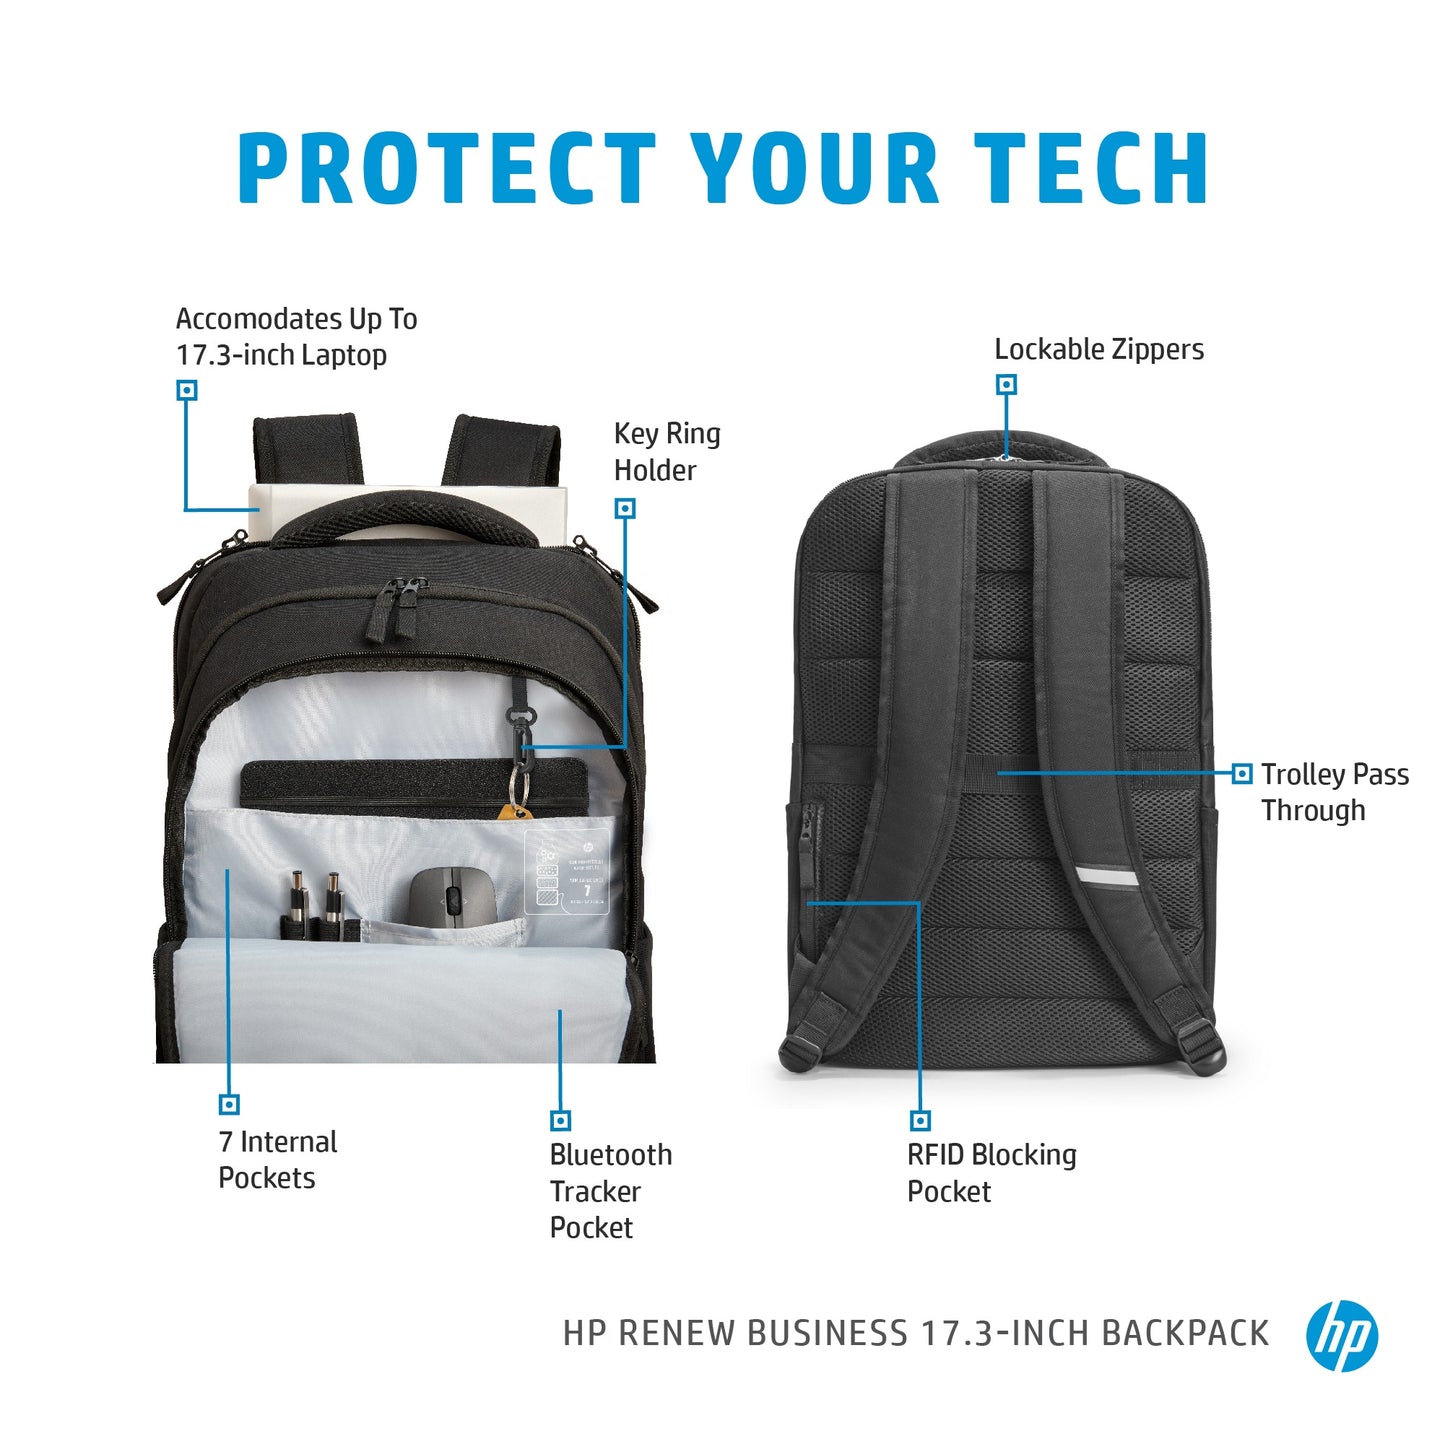 HP Renew Business 17.3-inch Laptop Backpack-7